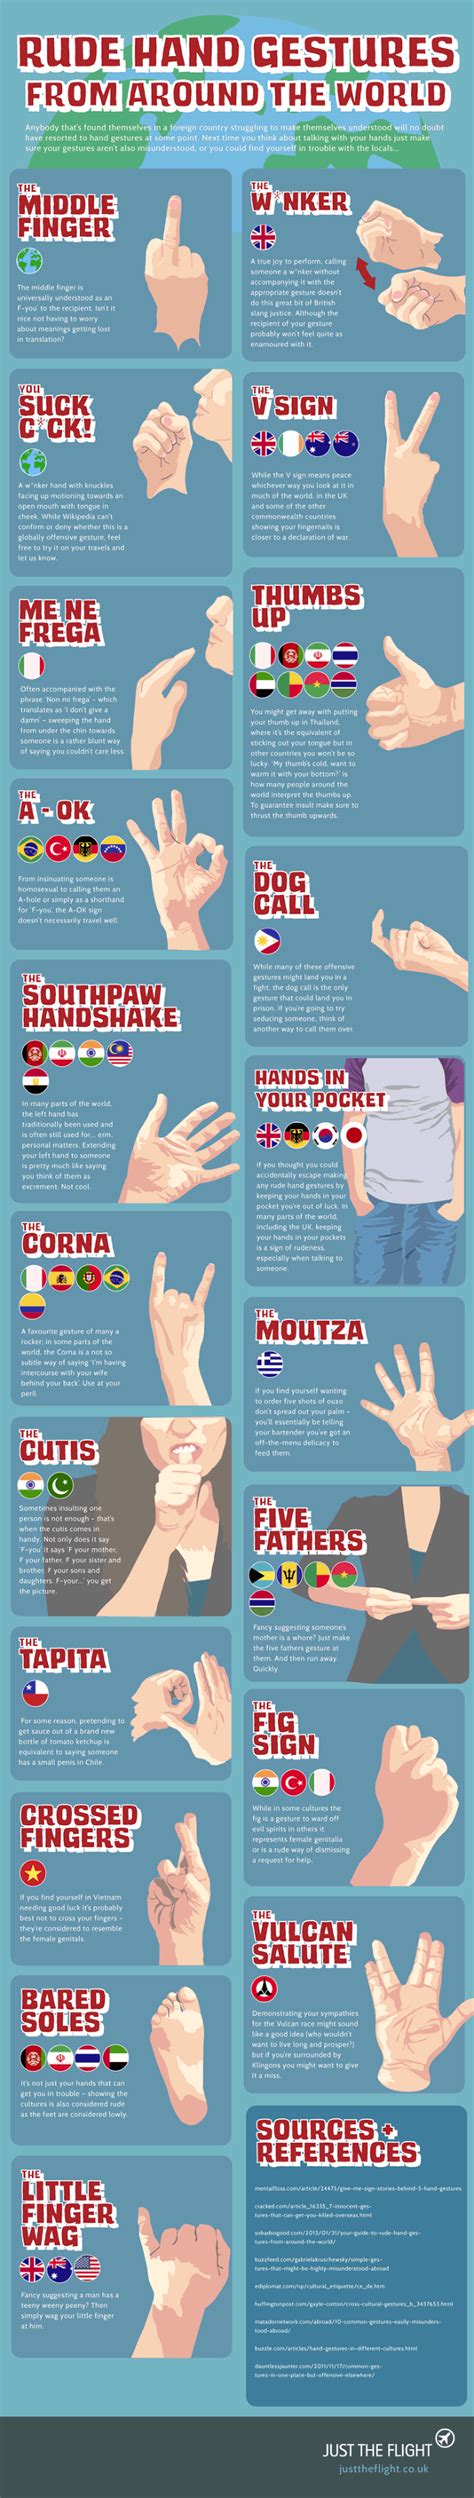 Infographic How To Avoid Accidentally Making Rude Hand Gestures Abroad